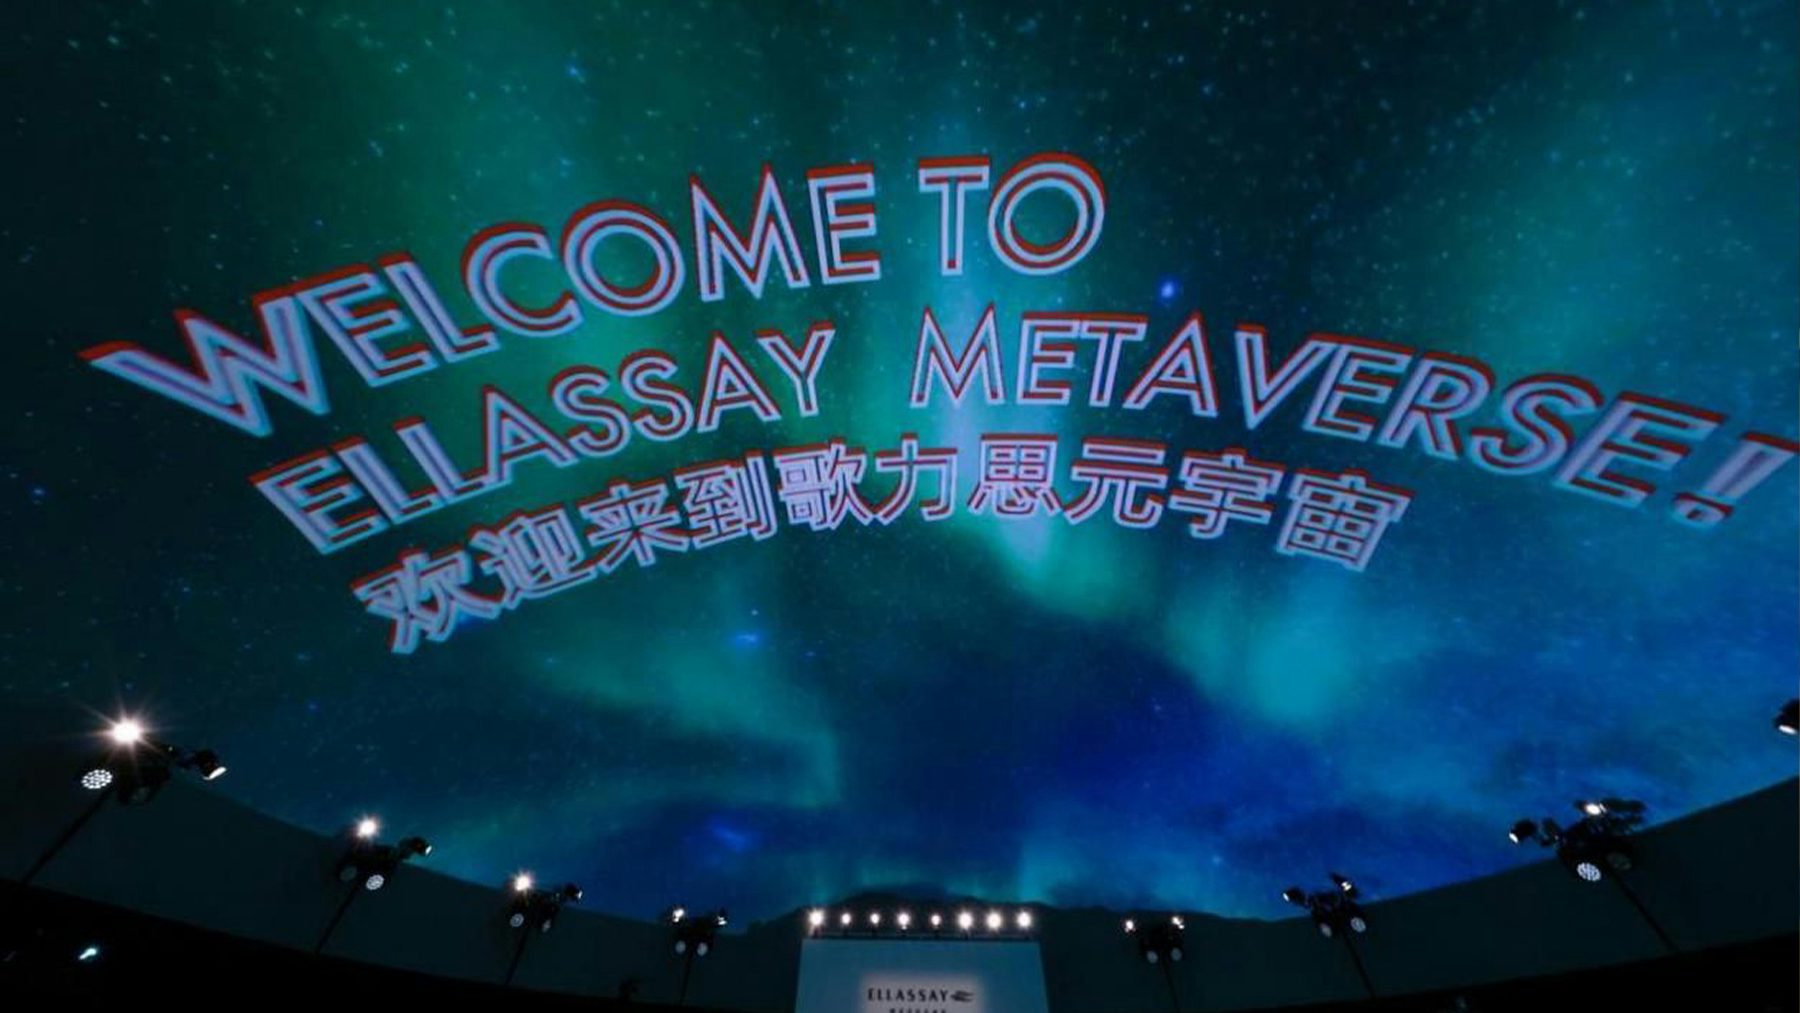 Shenzhen Fashion Week's 360-degree dome debuted at Ellassay Weekend's show on opening night. Ellassay.